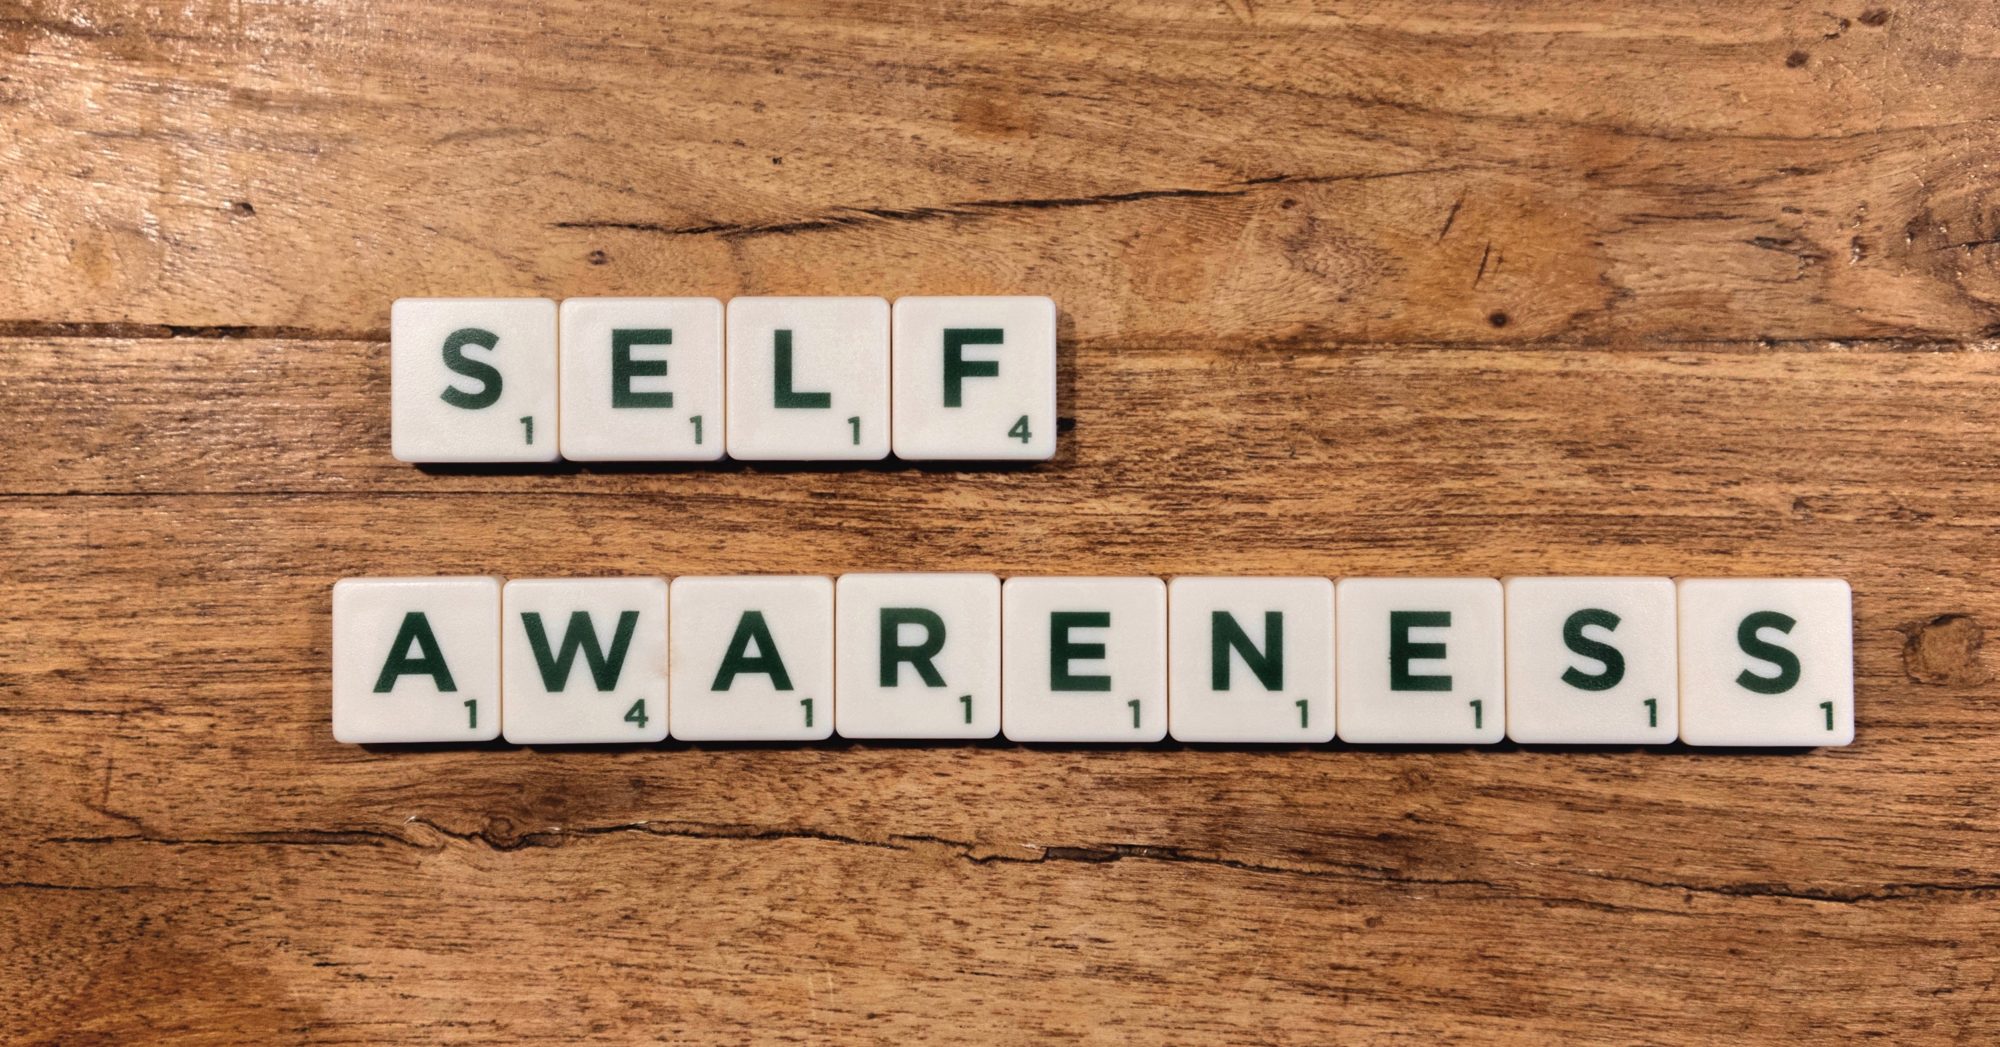 Why successful leadership starts with self-awareness